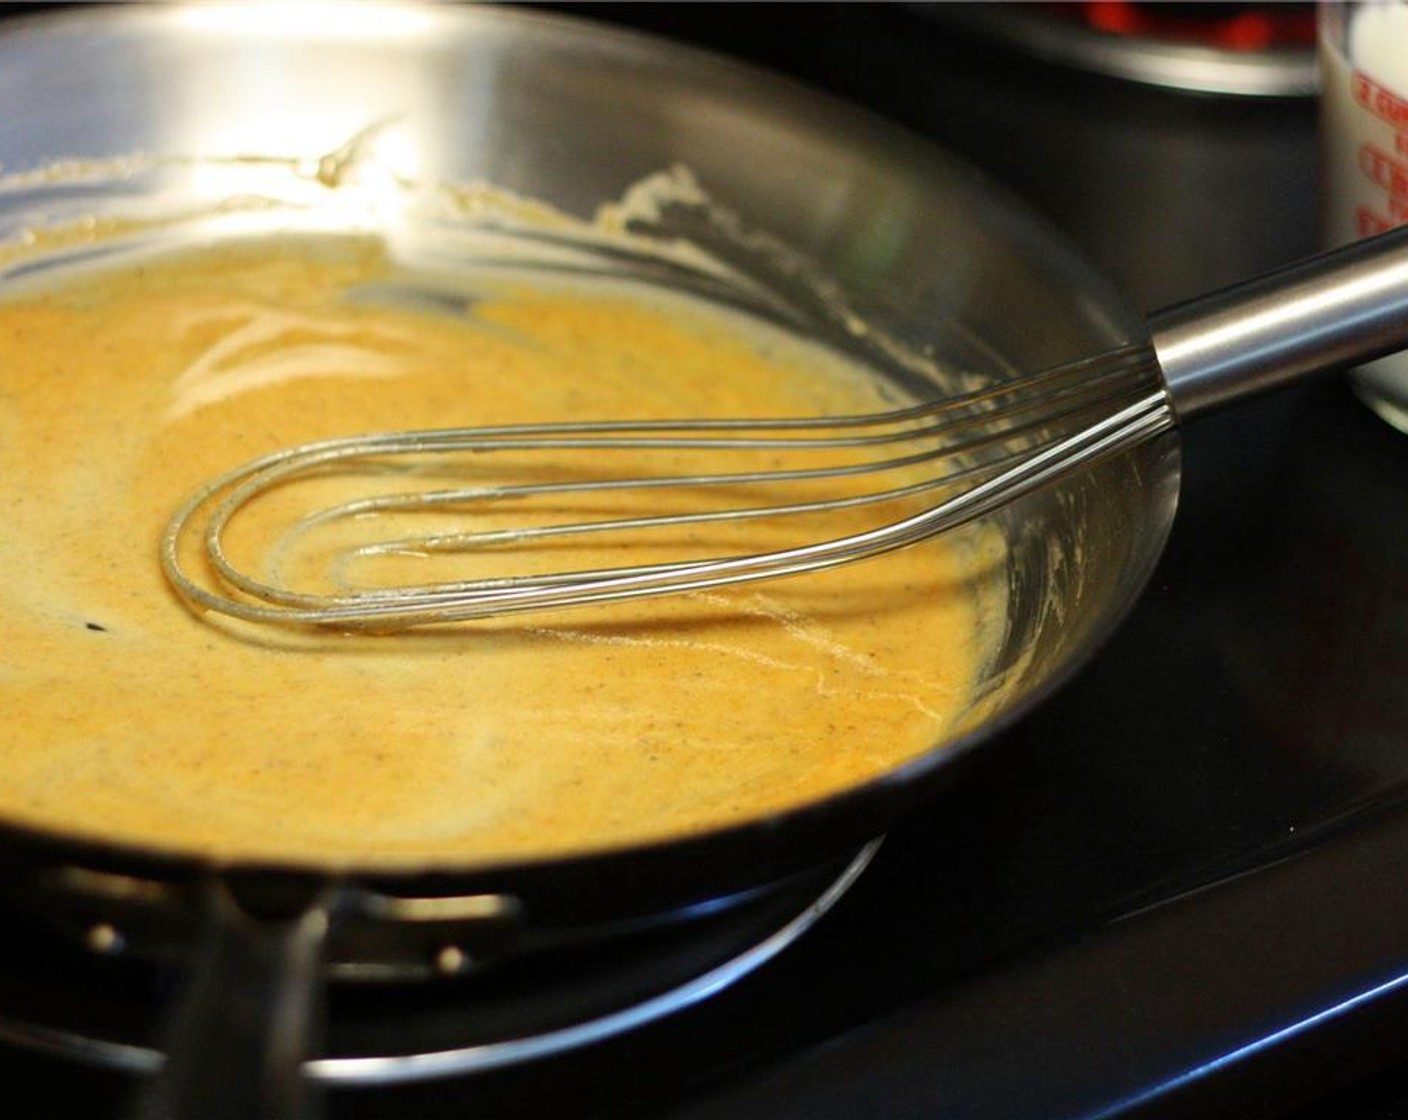 step 4 Once butter has melted, add the flour mixture to the butter. Use a roux whisk or a large fork to mix, whisking constantly. The mixture will begin to smooth out. Once it has cooked for about 3 minutes, slowly add the milk.